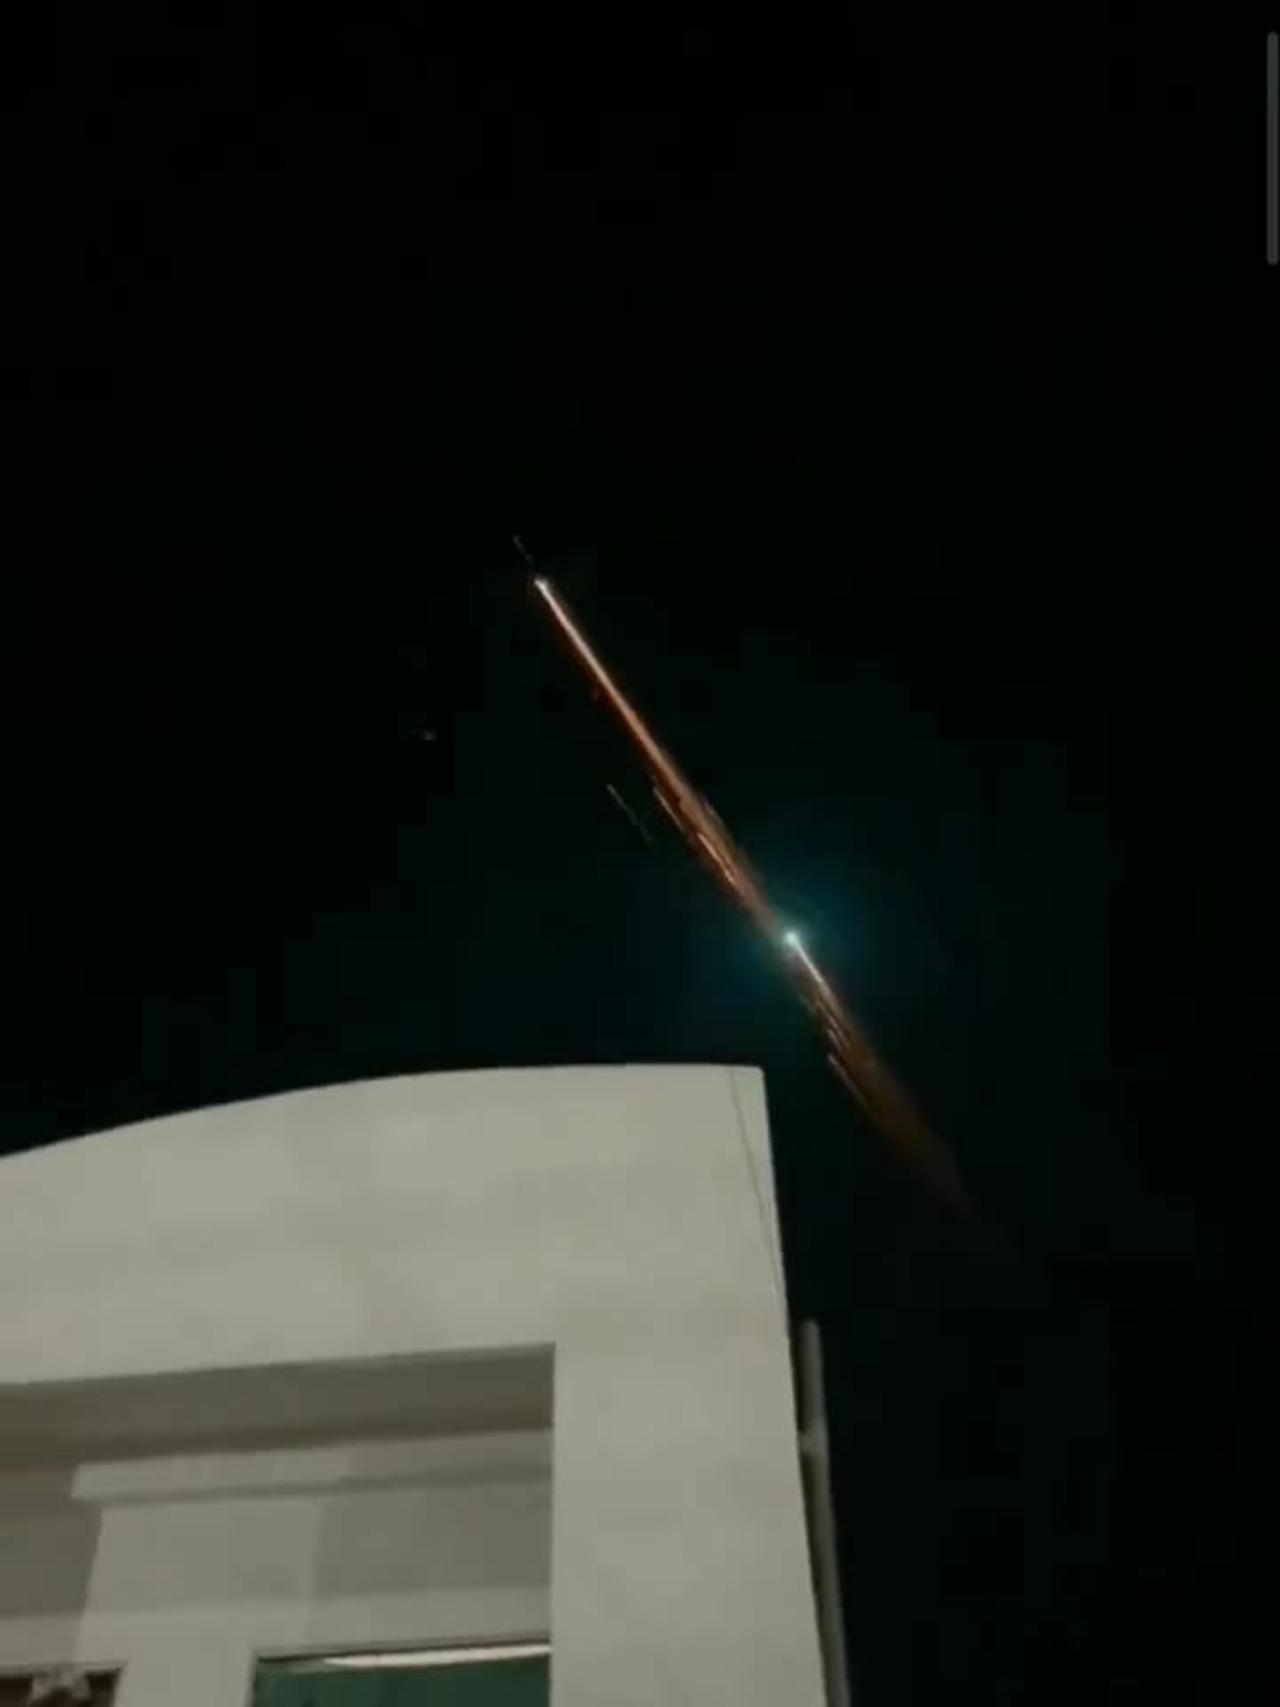 NEW - Chinese rocket re-enters Earth, burns up in skies over India.